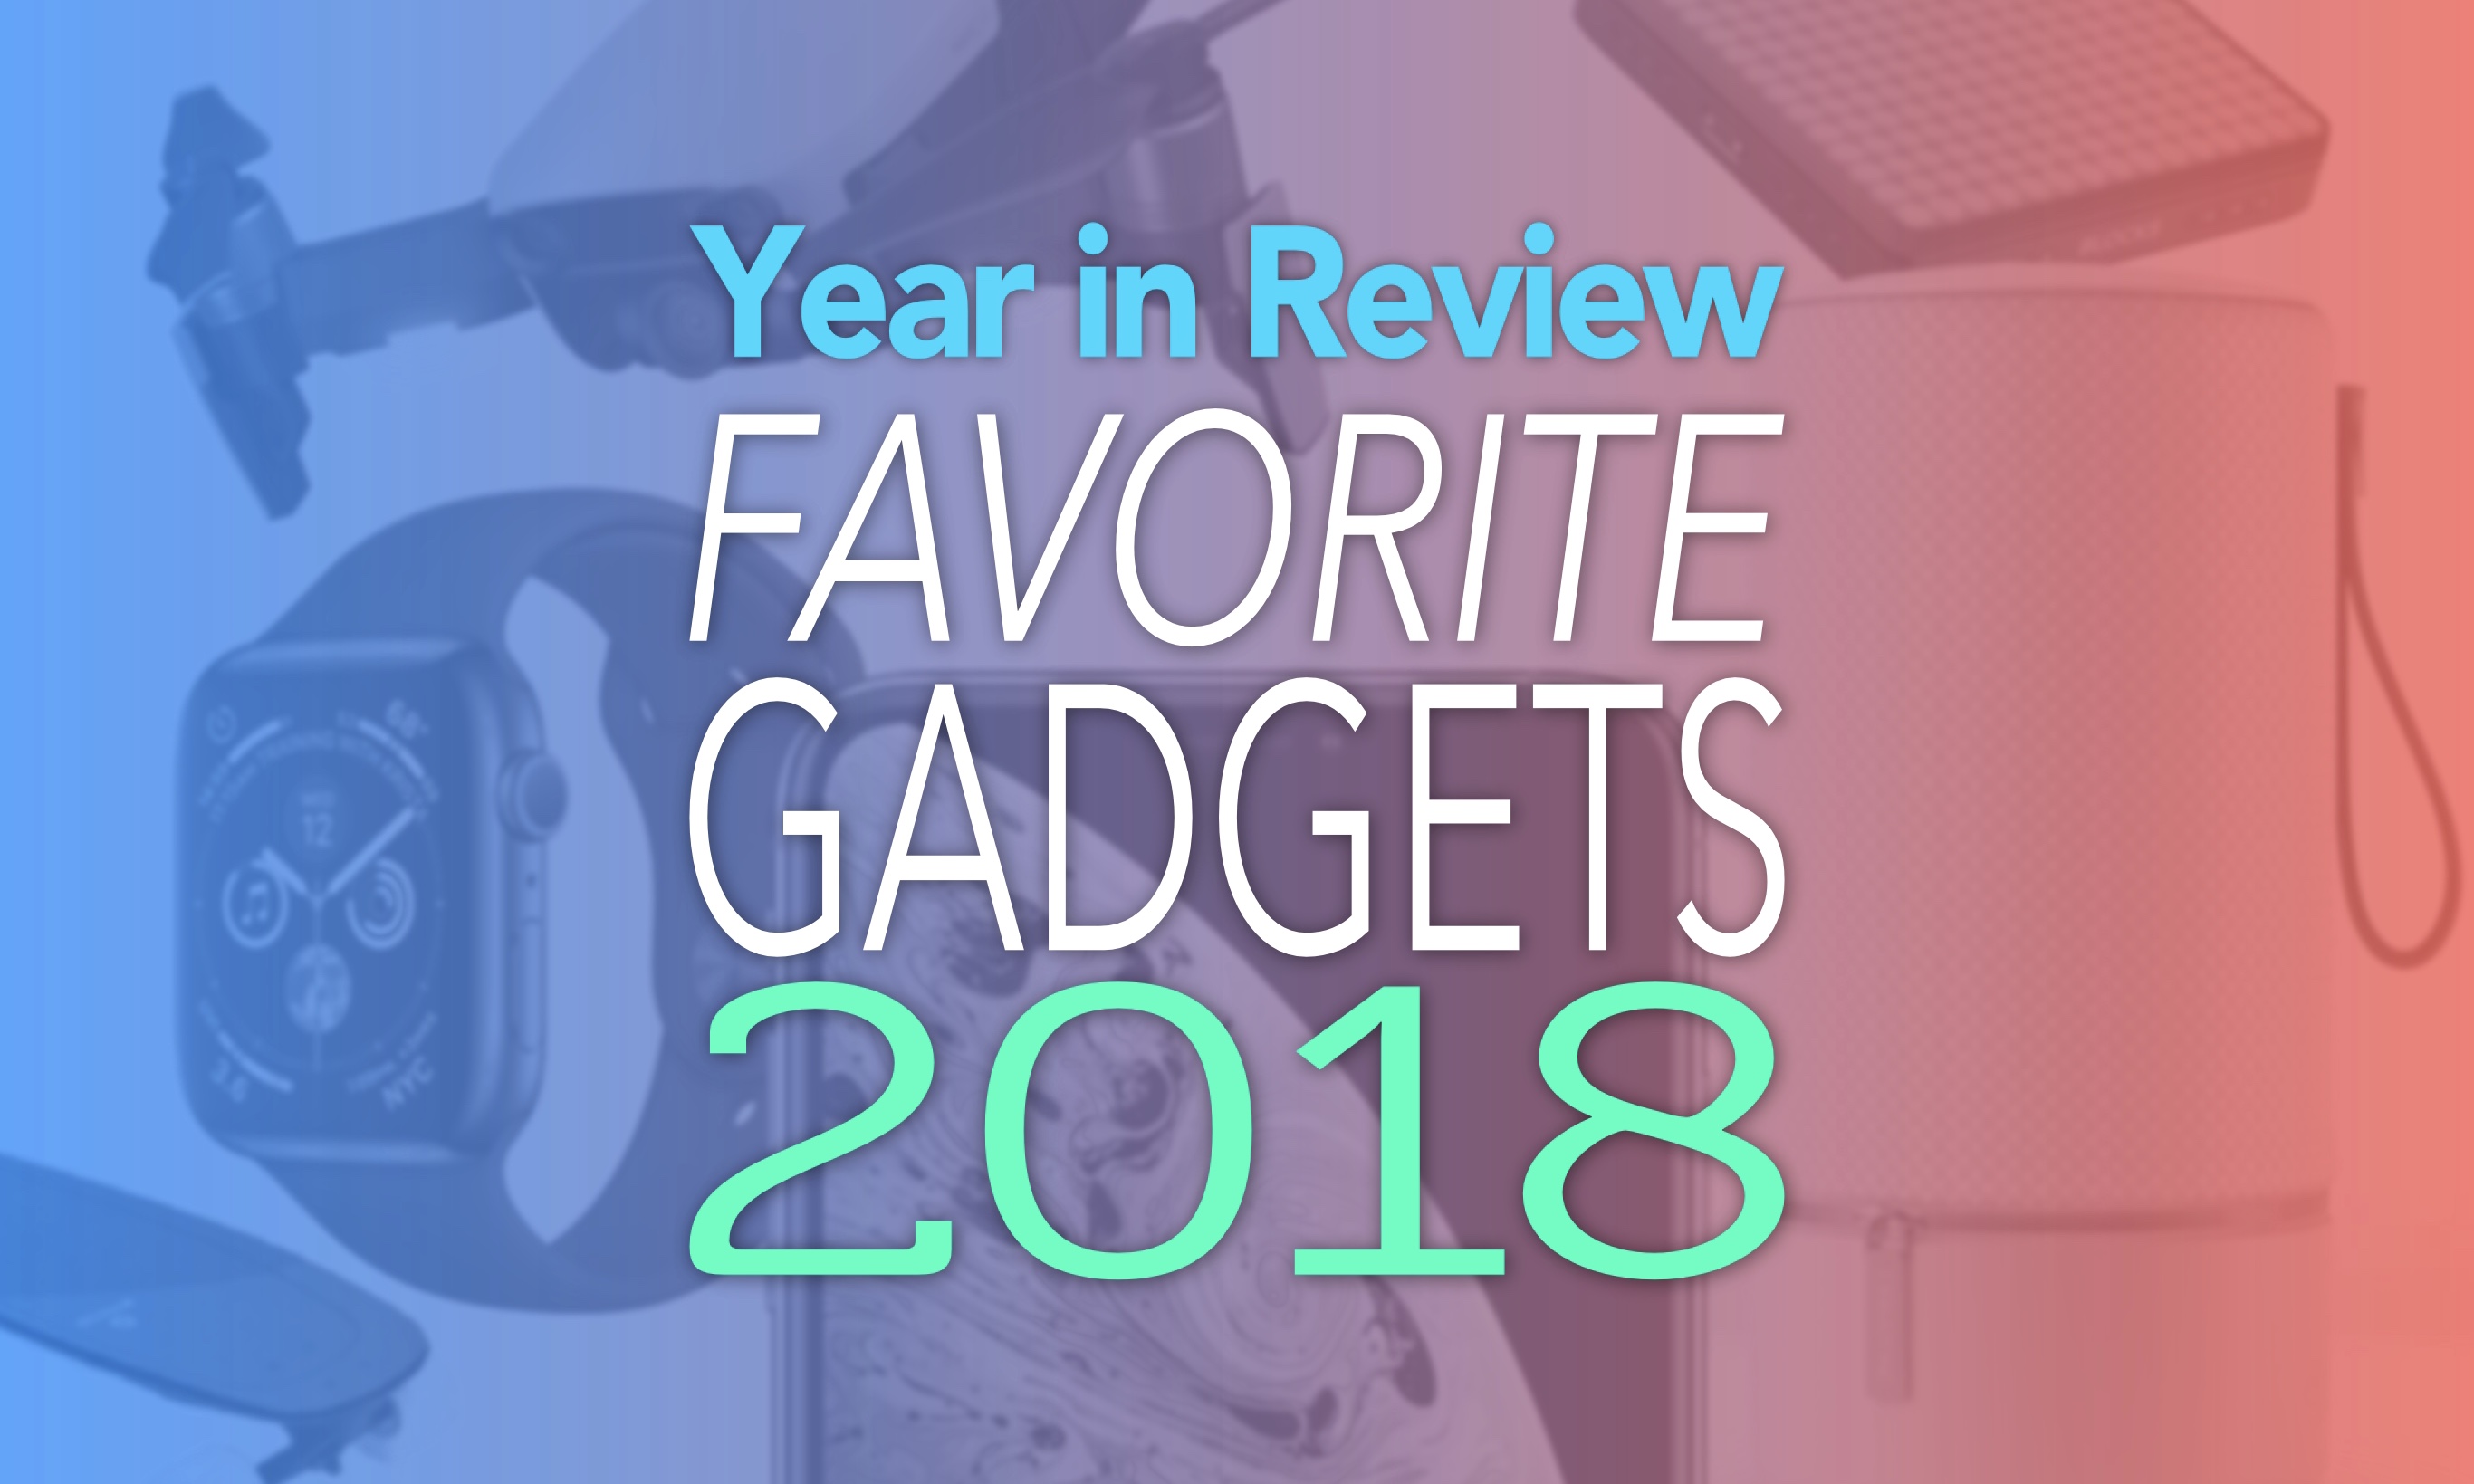 Year in Review Favorite Gadgets 2018